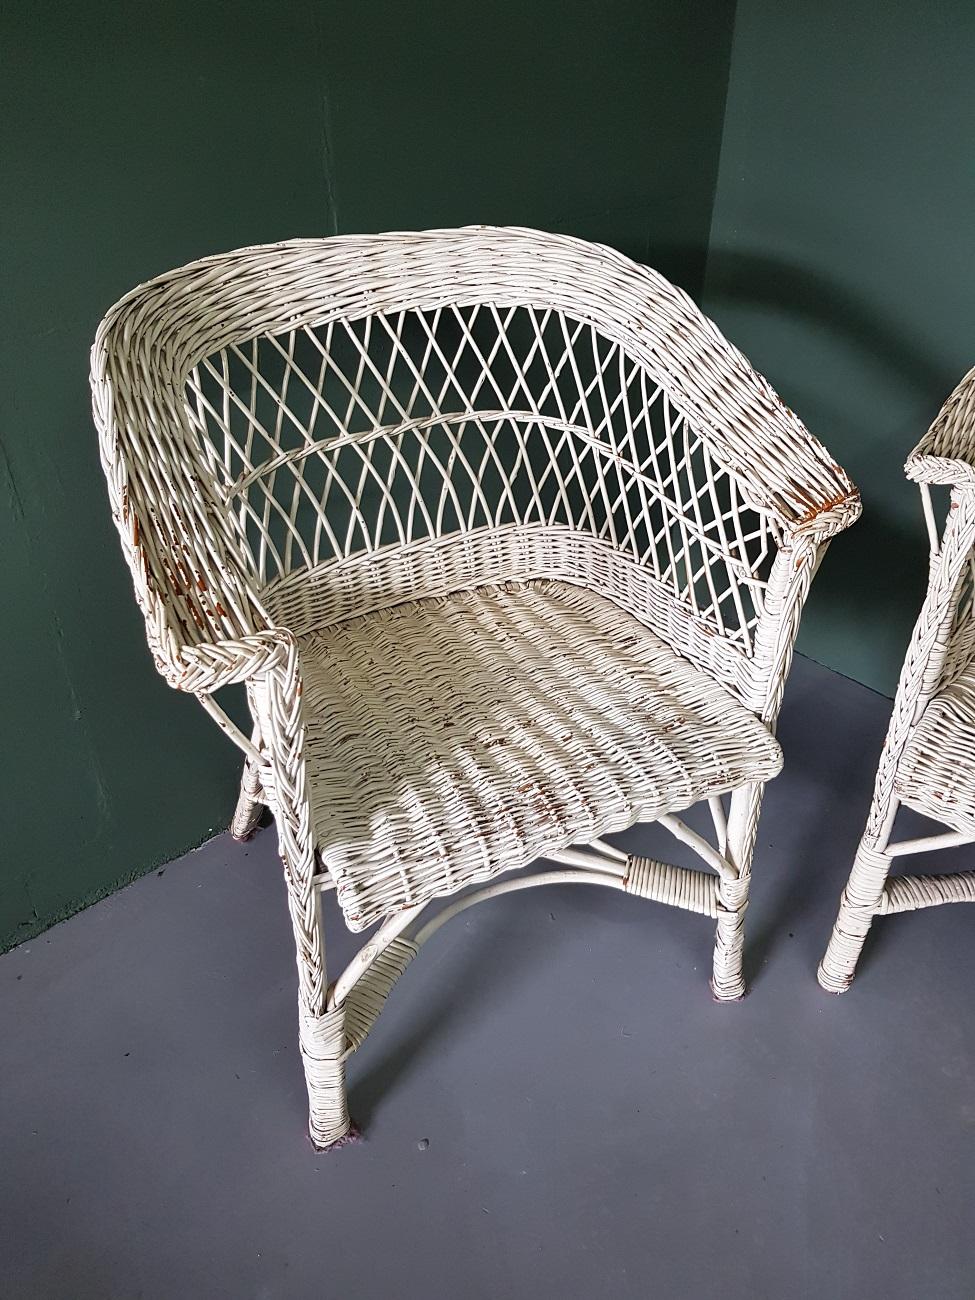 A pair of vintage white wicker garden chairs with wear consistent by age and use but not broken, these are from the years 1960s-1970s.

The measurements are:
Depth 43 cm/ 16.9 inch.
Width 63 cm/ 24.8 inch.
Height 81 cm/ 31.8 inch.
Seat height